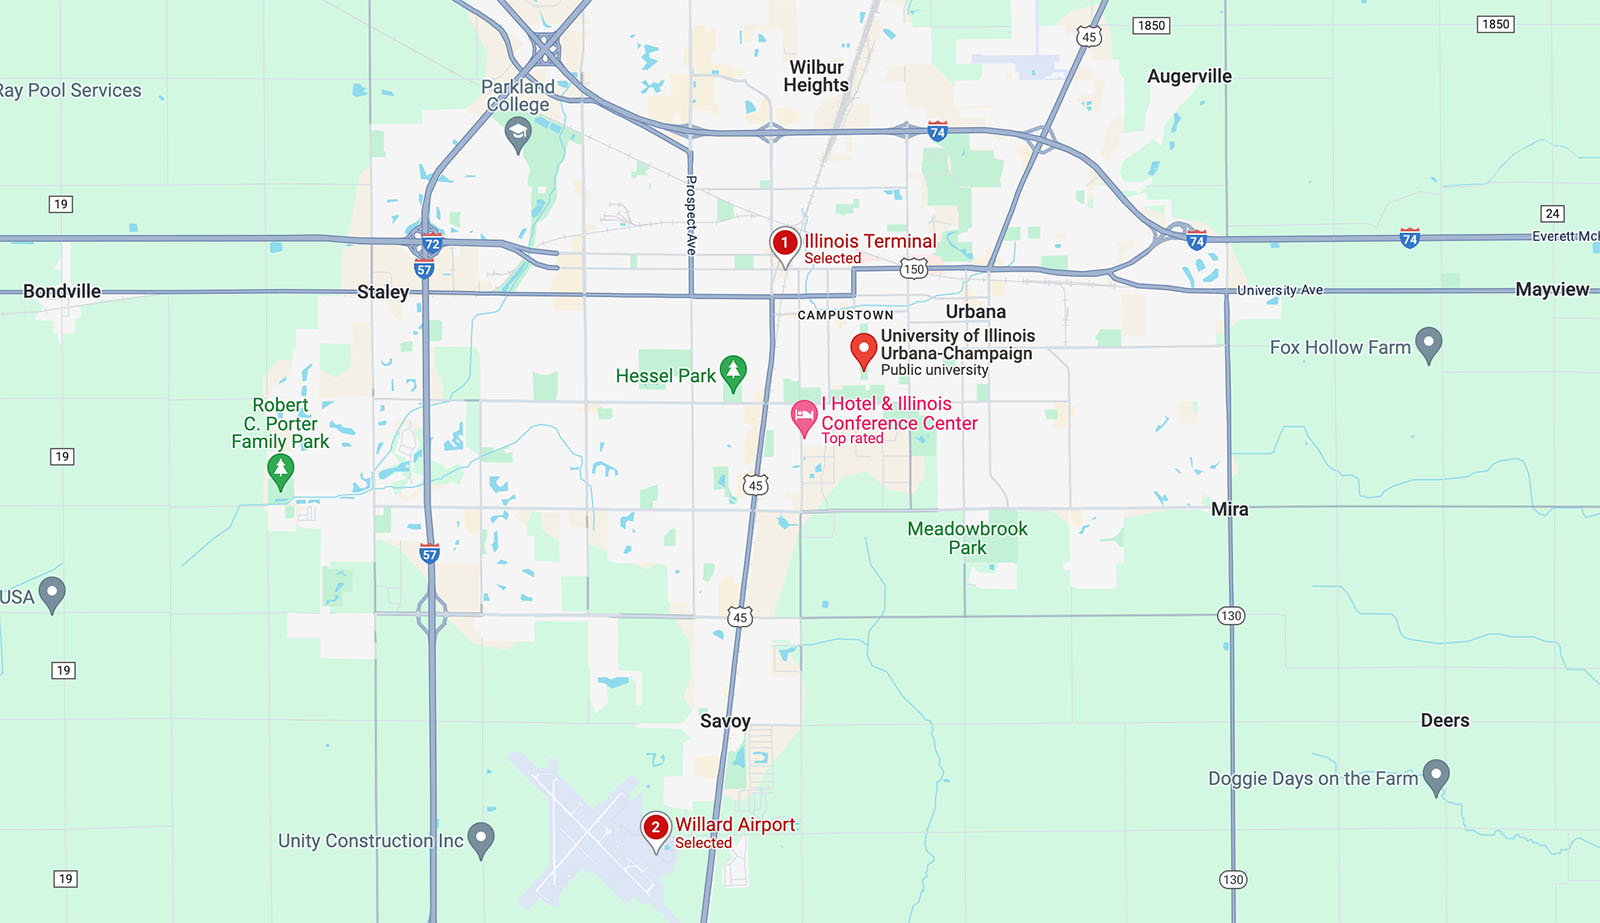 Google map of the University of Illinois Urbana-Champaign and its surrounding area including points of interest like the Illinois Terminal Northwest of campus and Willard Airport to the South in Savoy